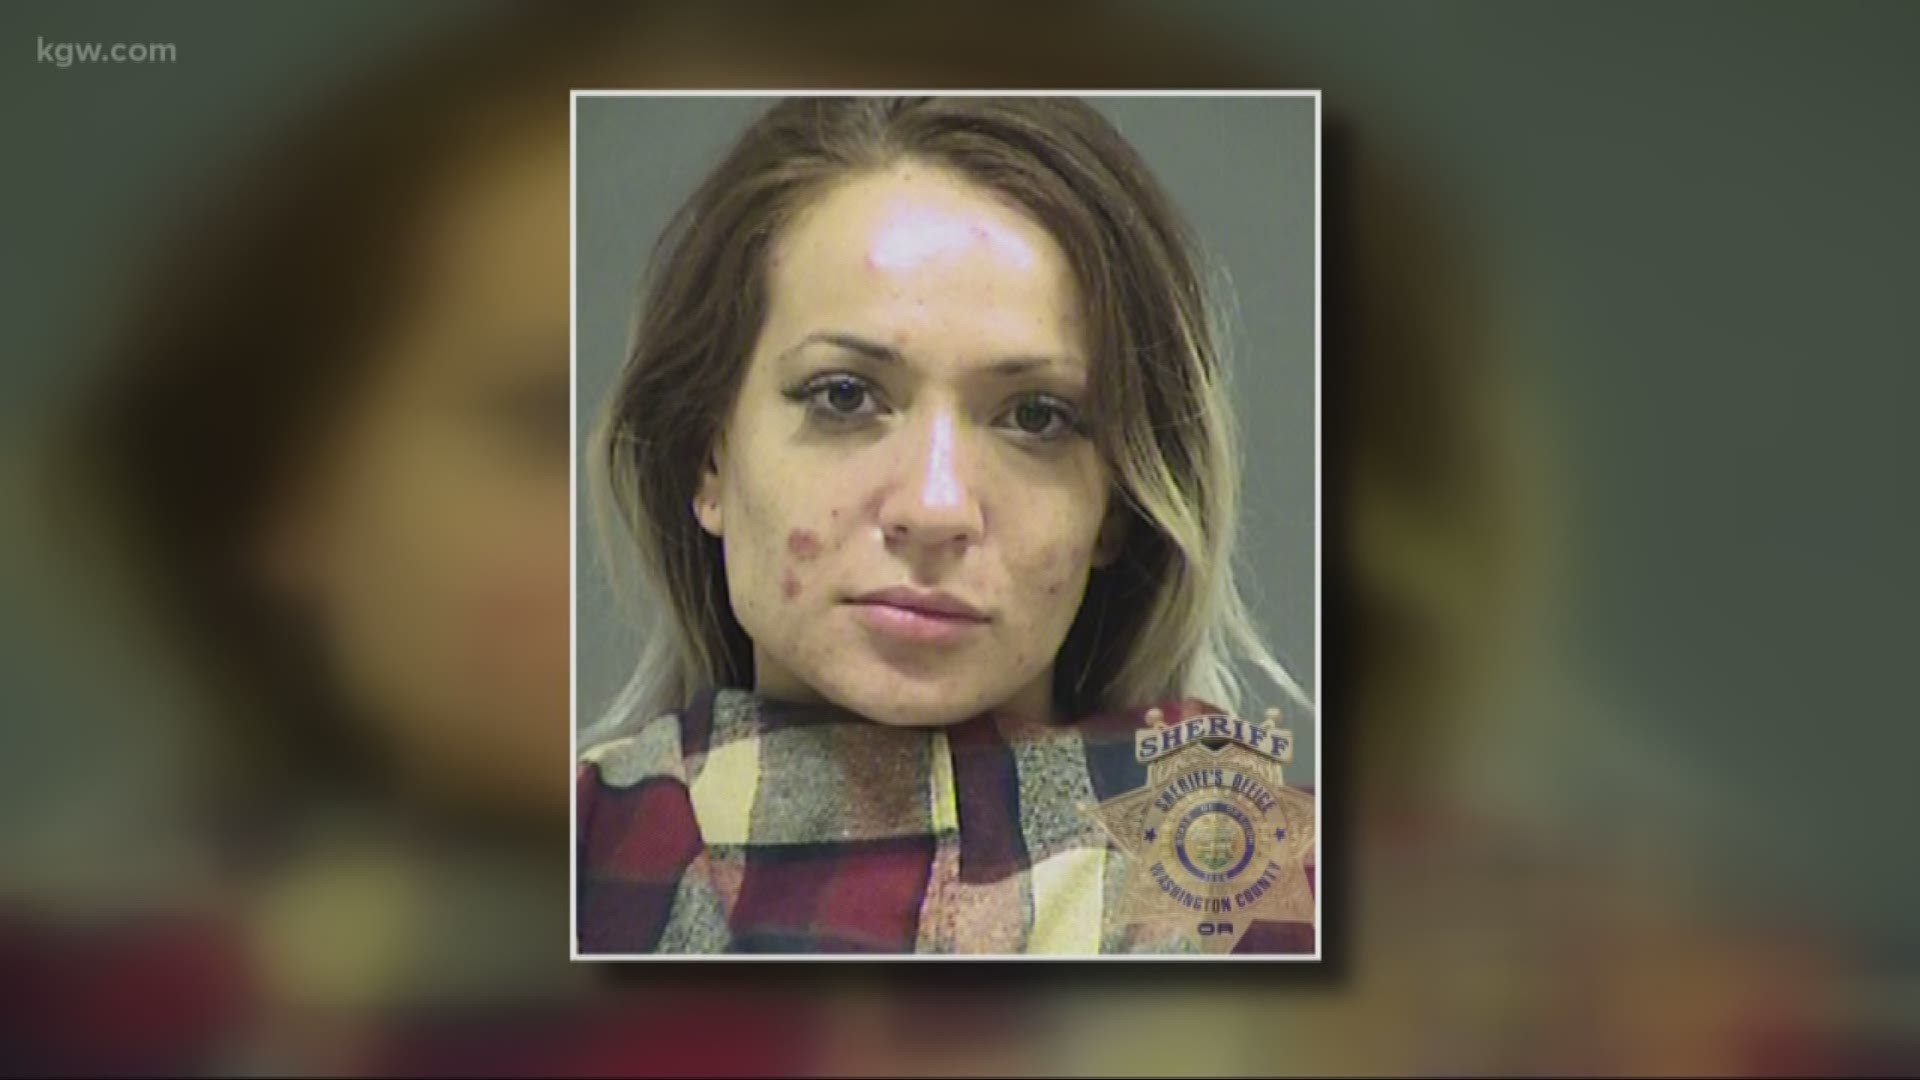 A Portland woman says friends have been getting in touch with her thinking she was involved in a crime. That's because her name was plastered on mug shots all over local media and used in court. But it turns out she's innocent, and she's actually a victim of identity theft.